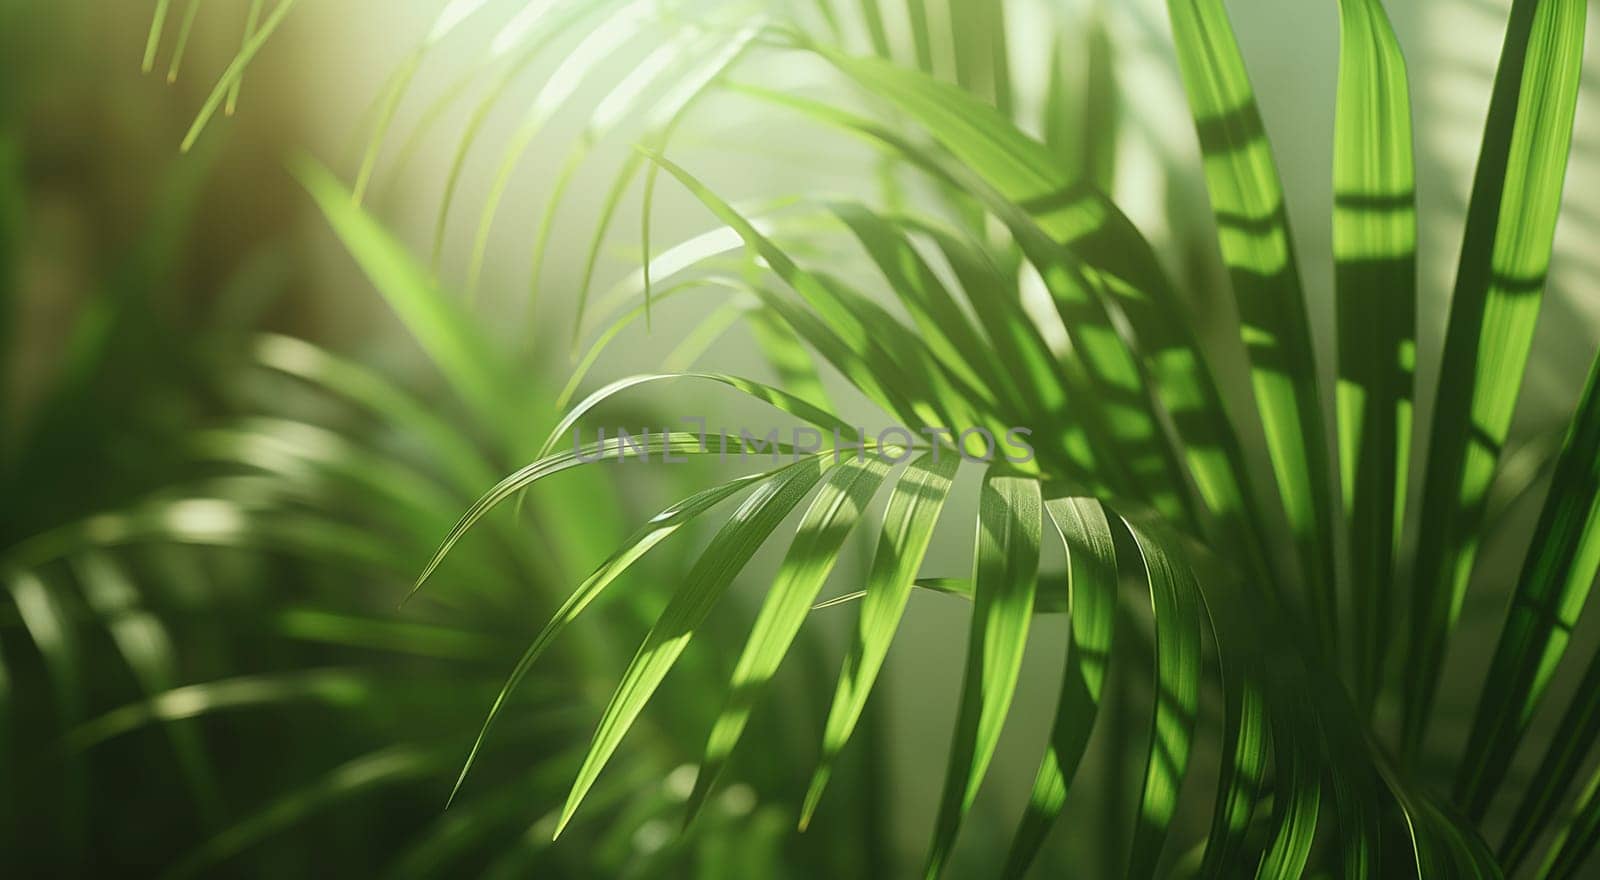 Lush green palm leaves bask in vibrant sunlight with a soft-focus background. High quality photo